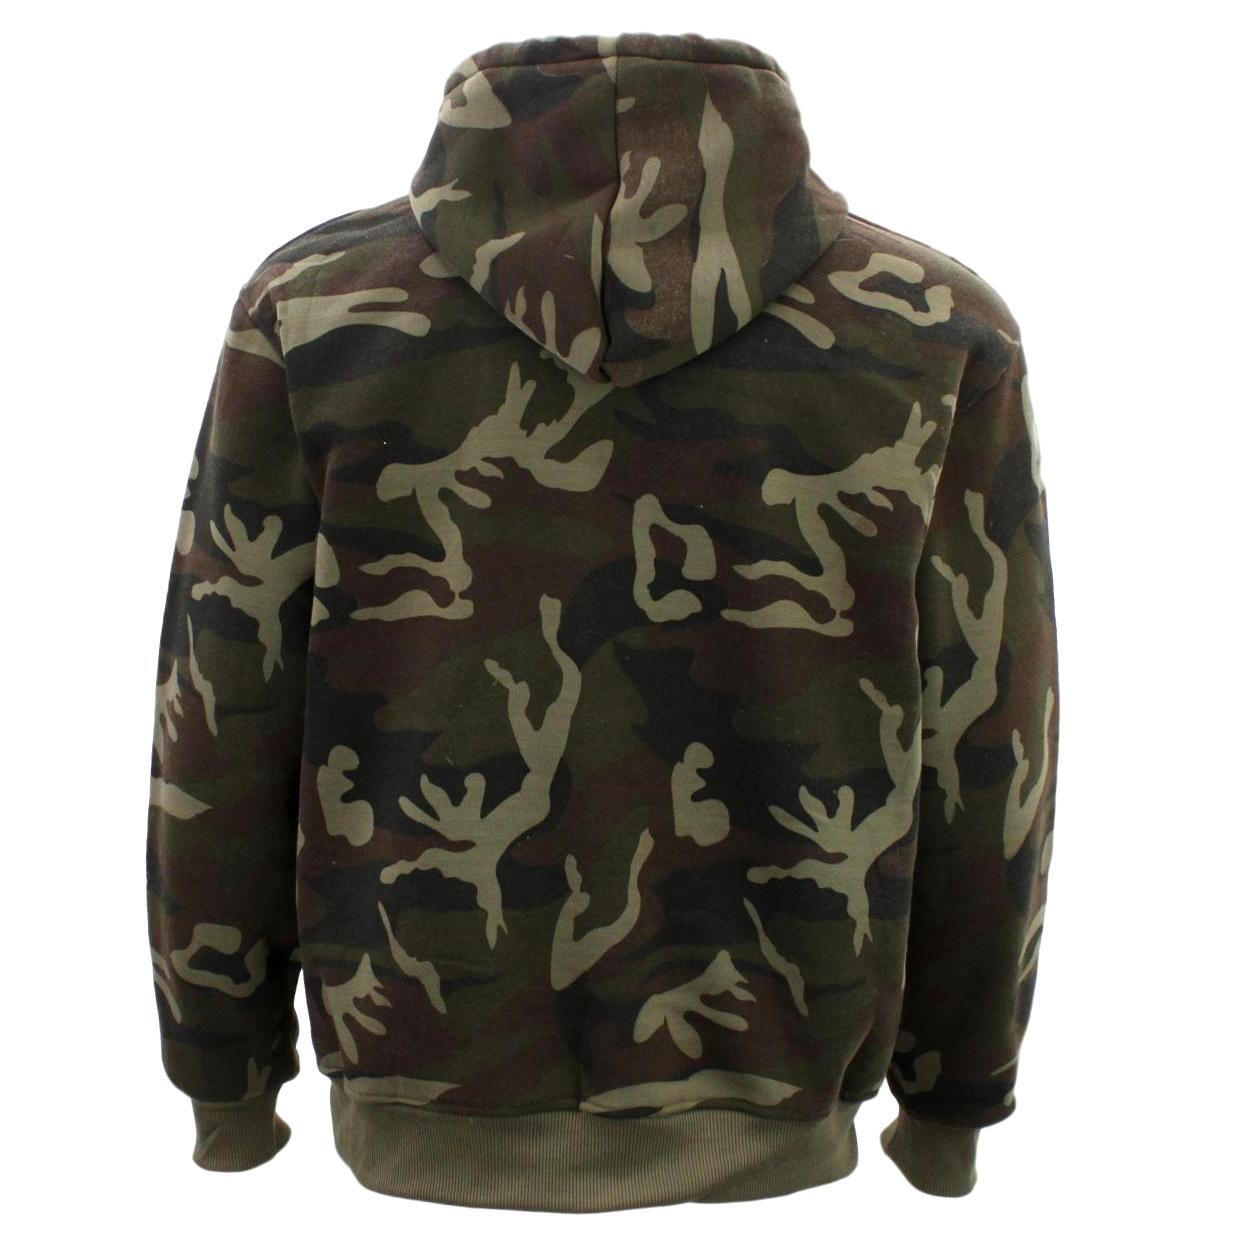 FIL Adult Men's Camo Pullover Hoodie Fleeced Camouflage Military Print ...